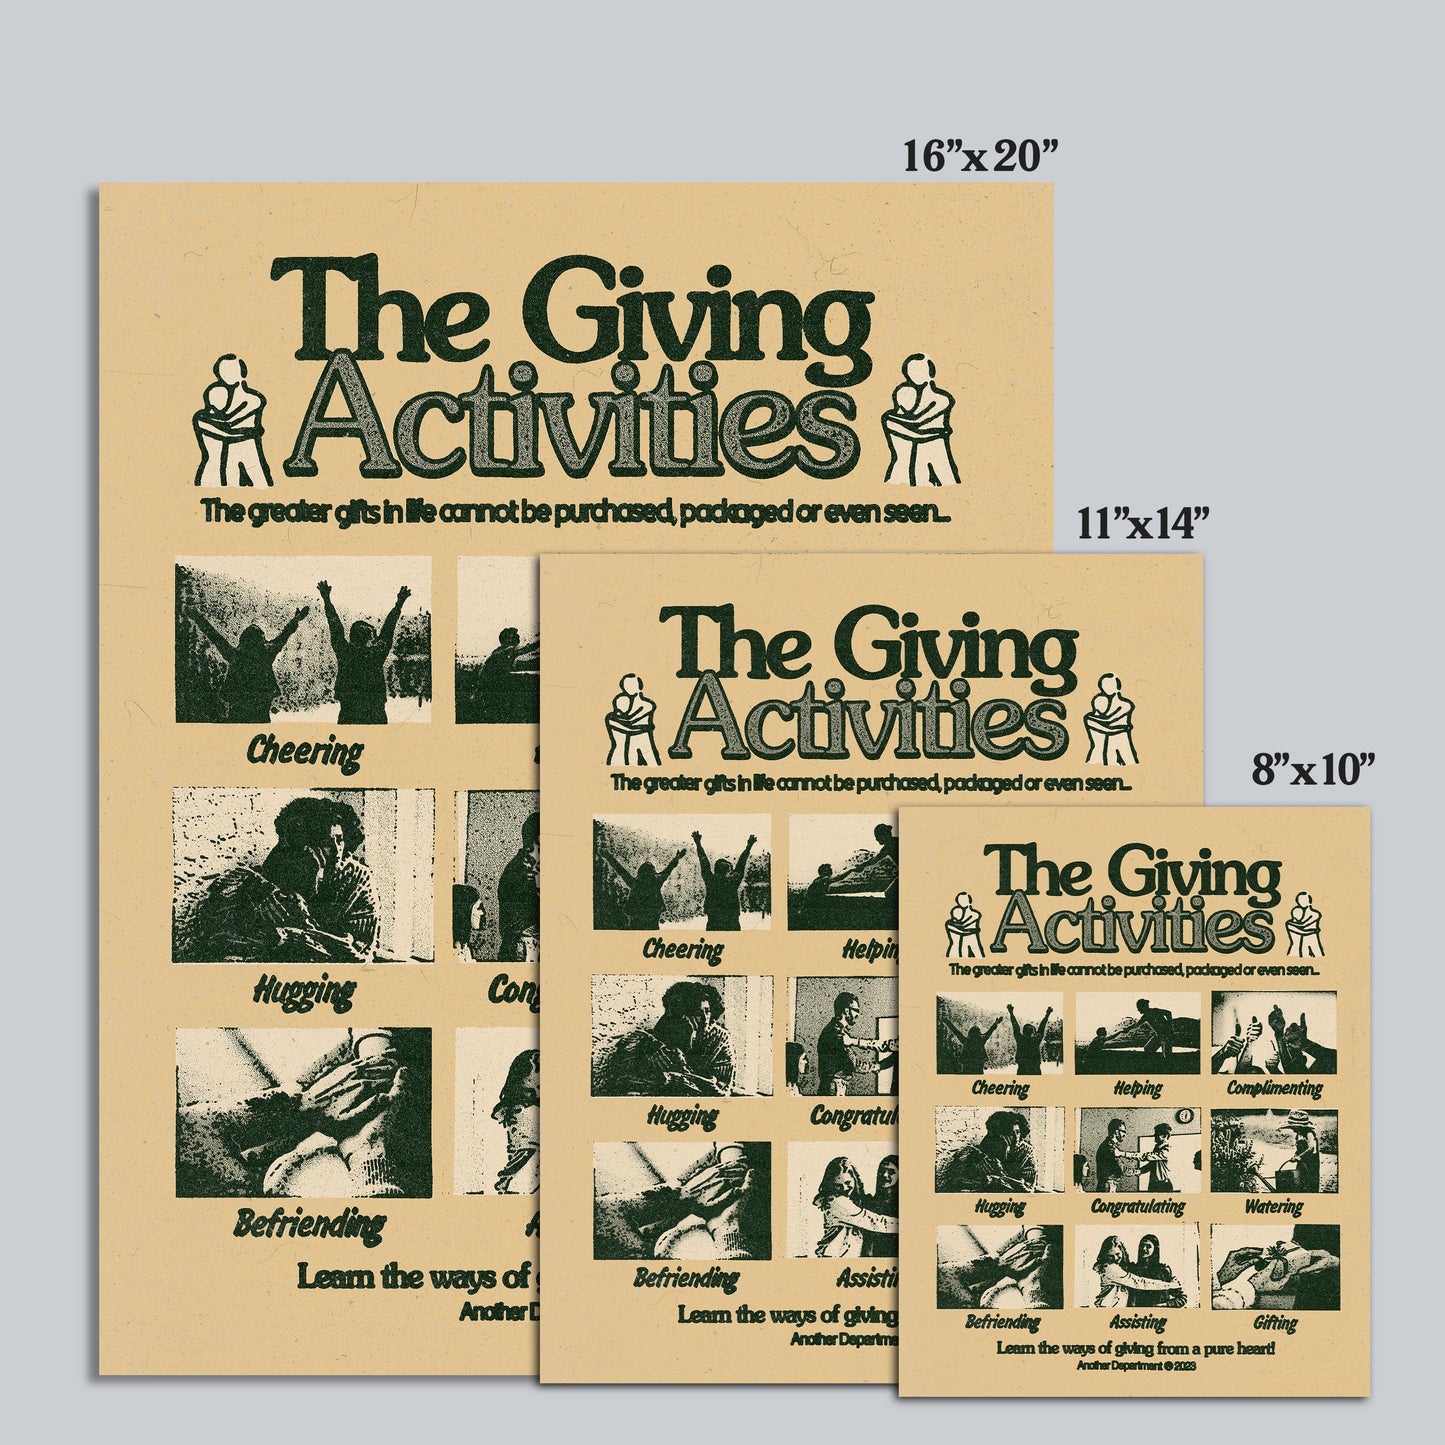 361 - The Giving Activities